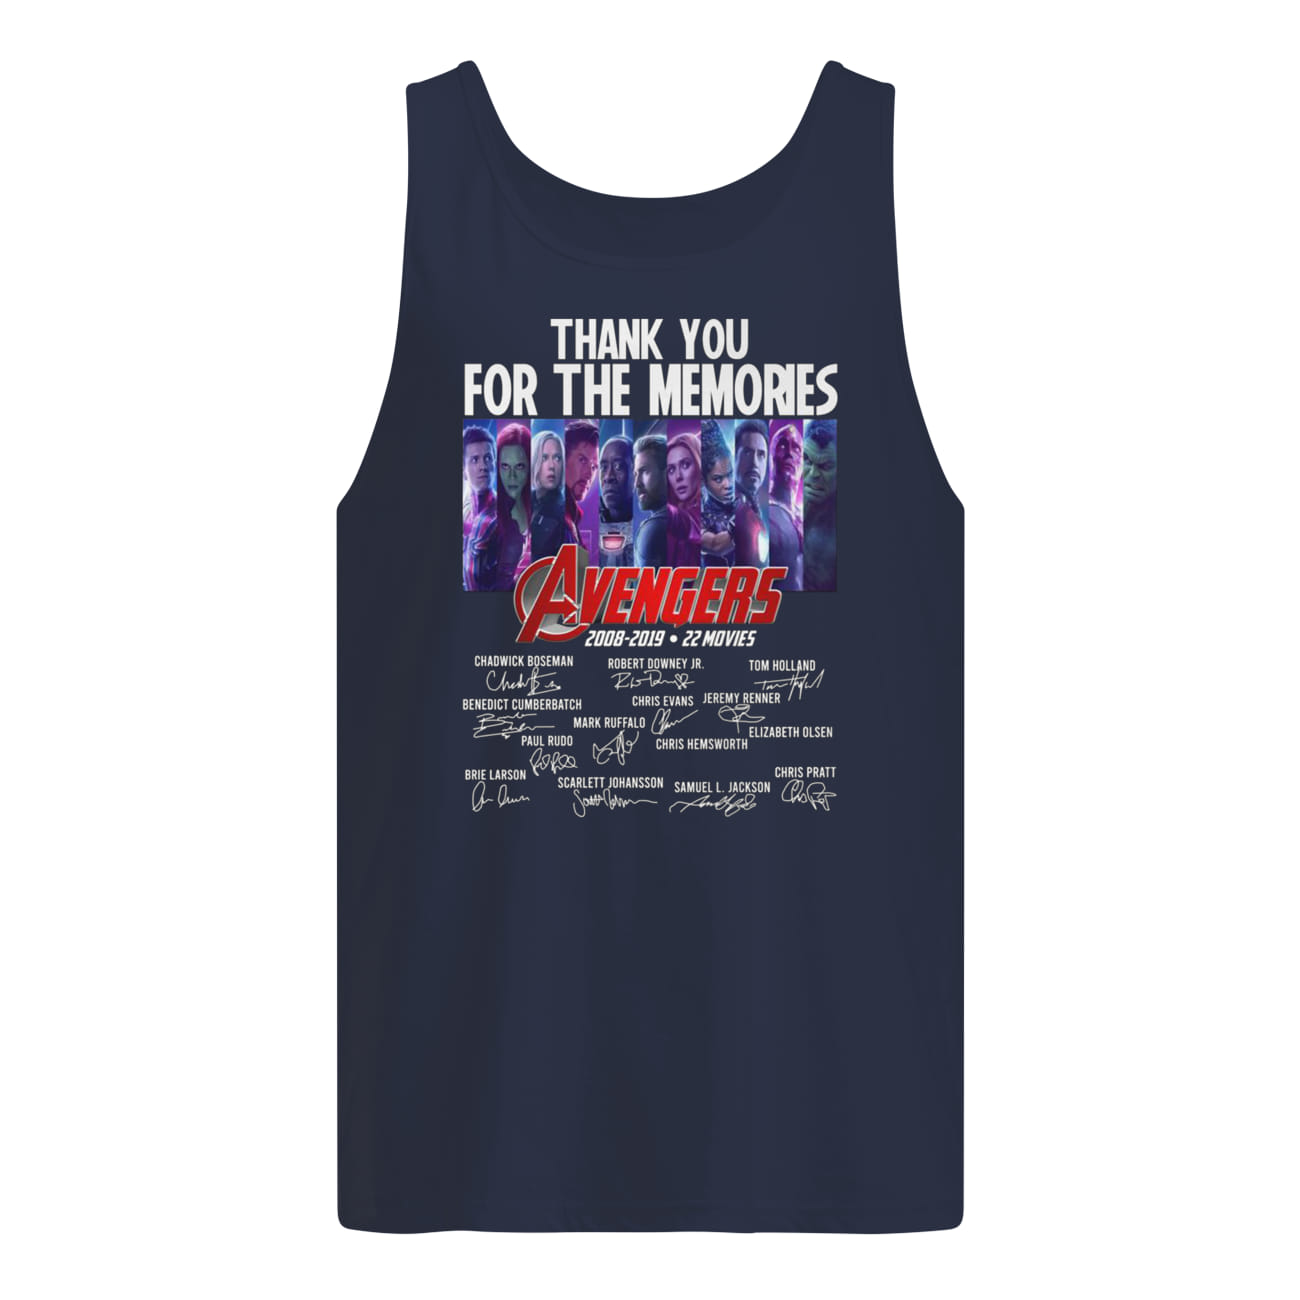 Thank you for the memories avengers 2008-2019 22 movies signature tank top